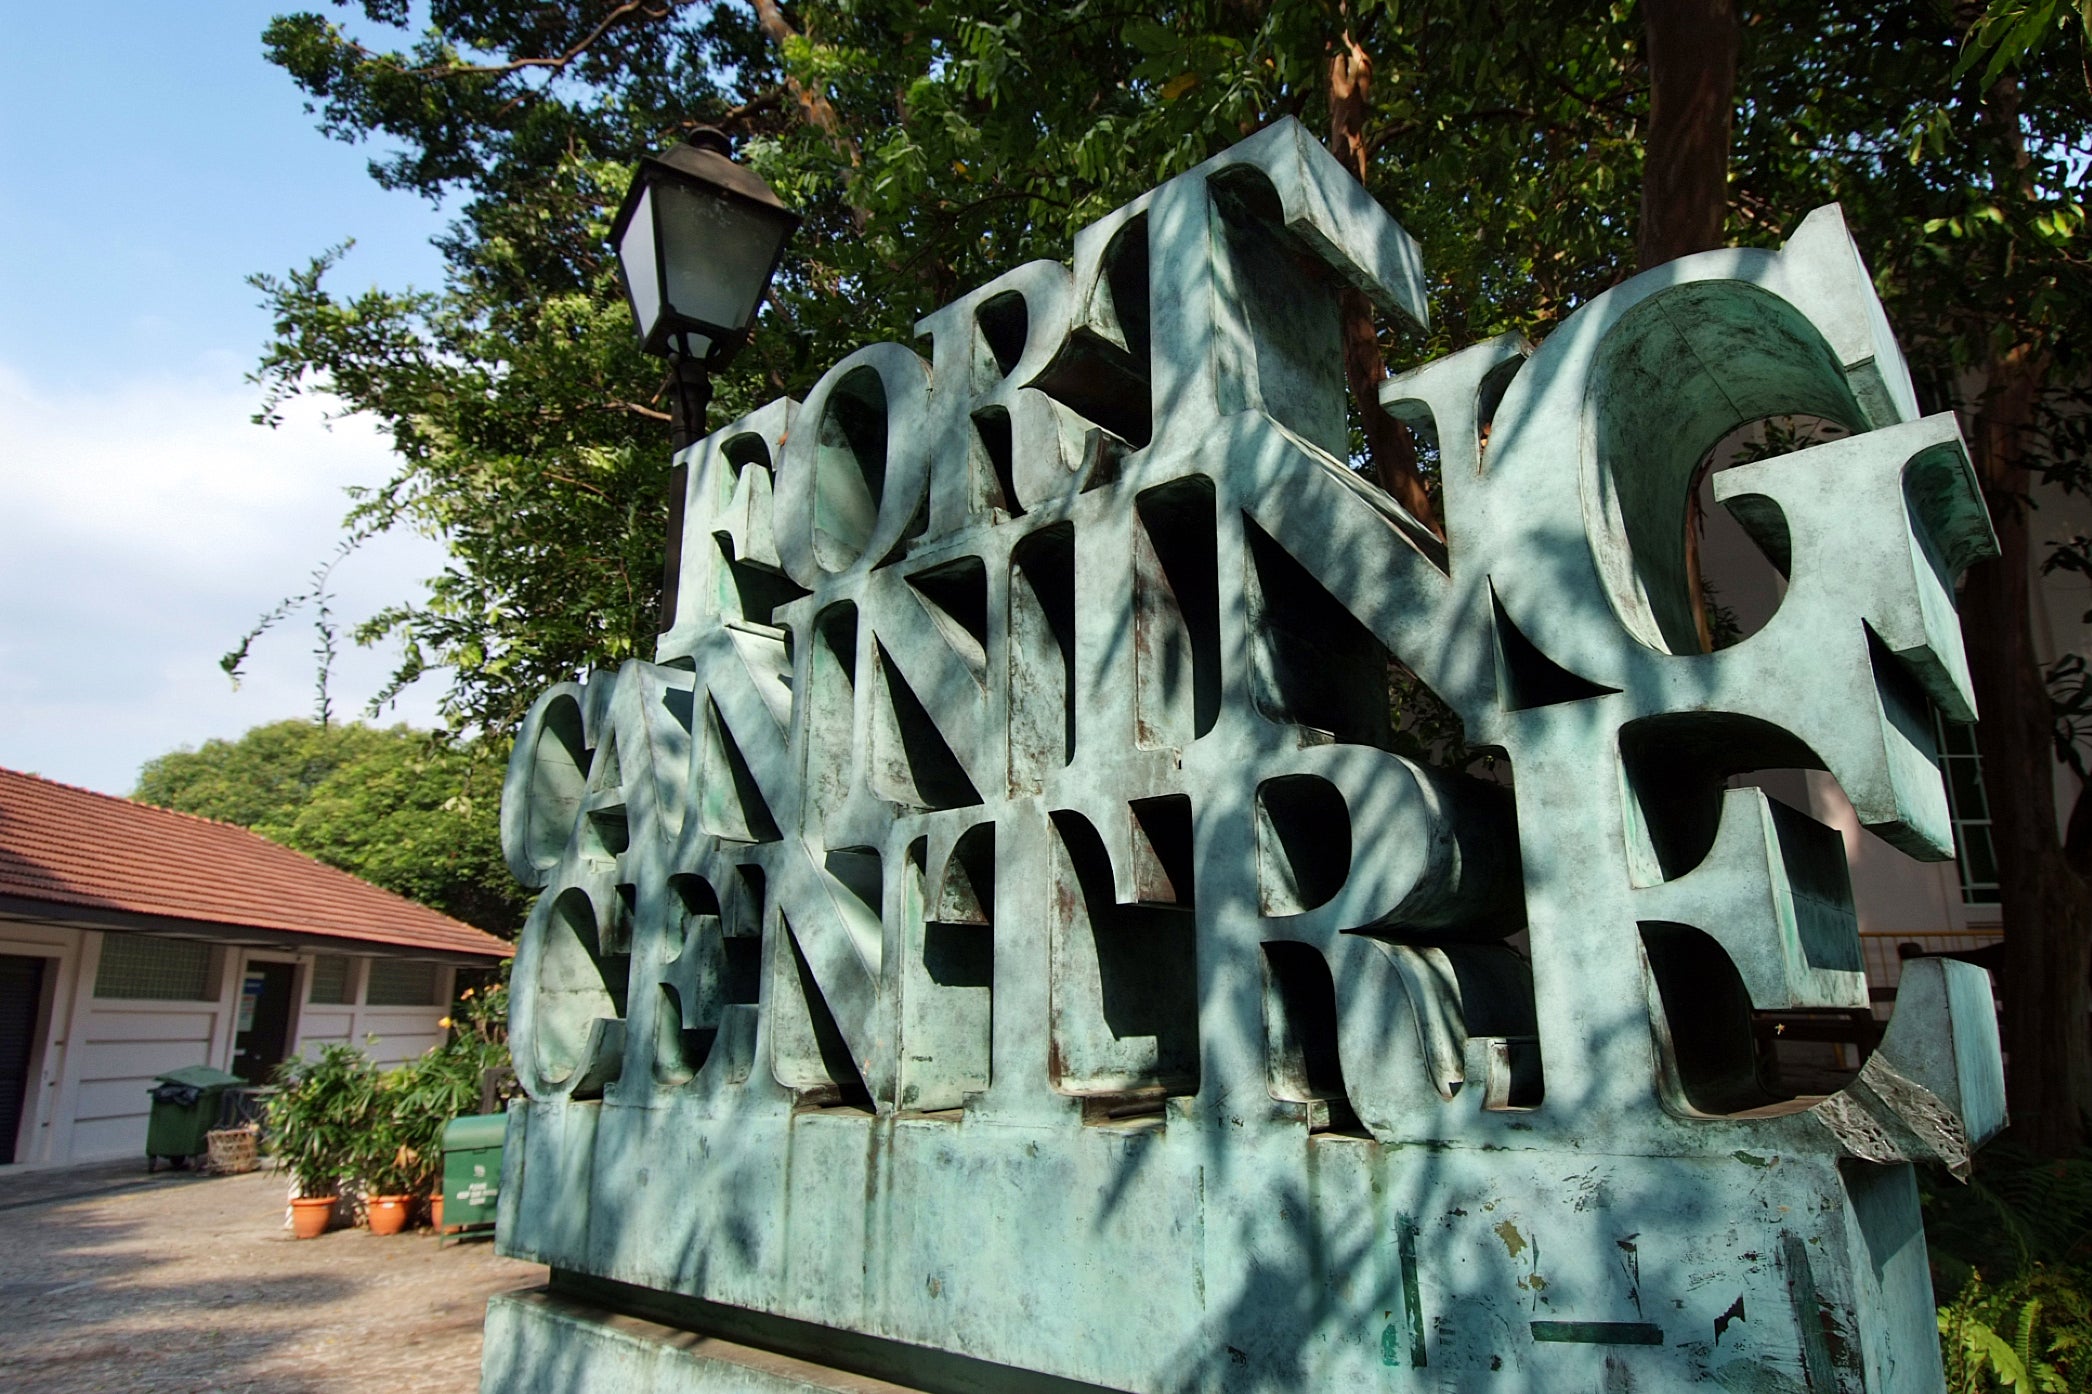 Fort Canning is home to The Bicentennial Experience